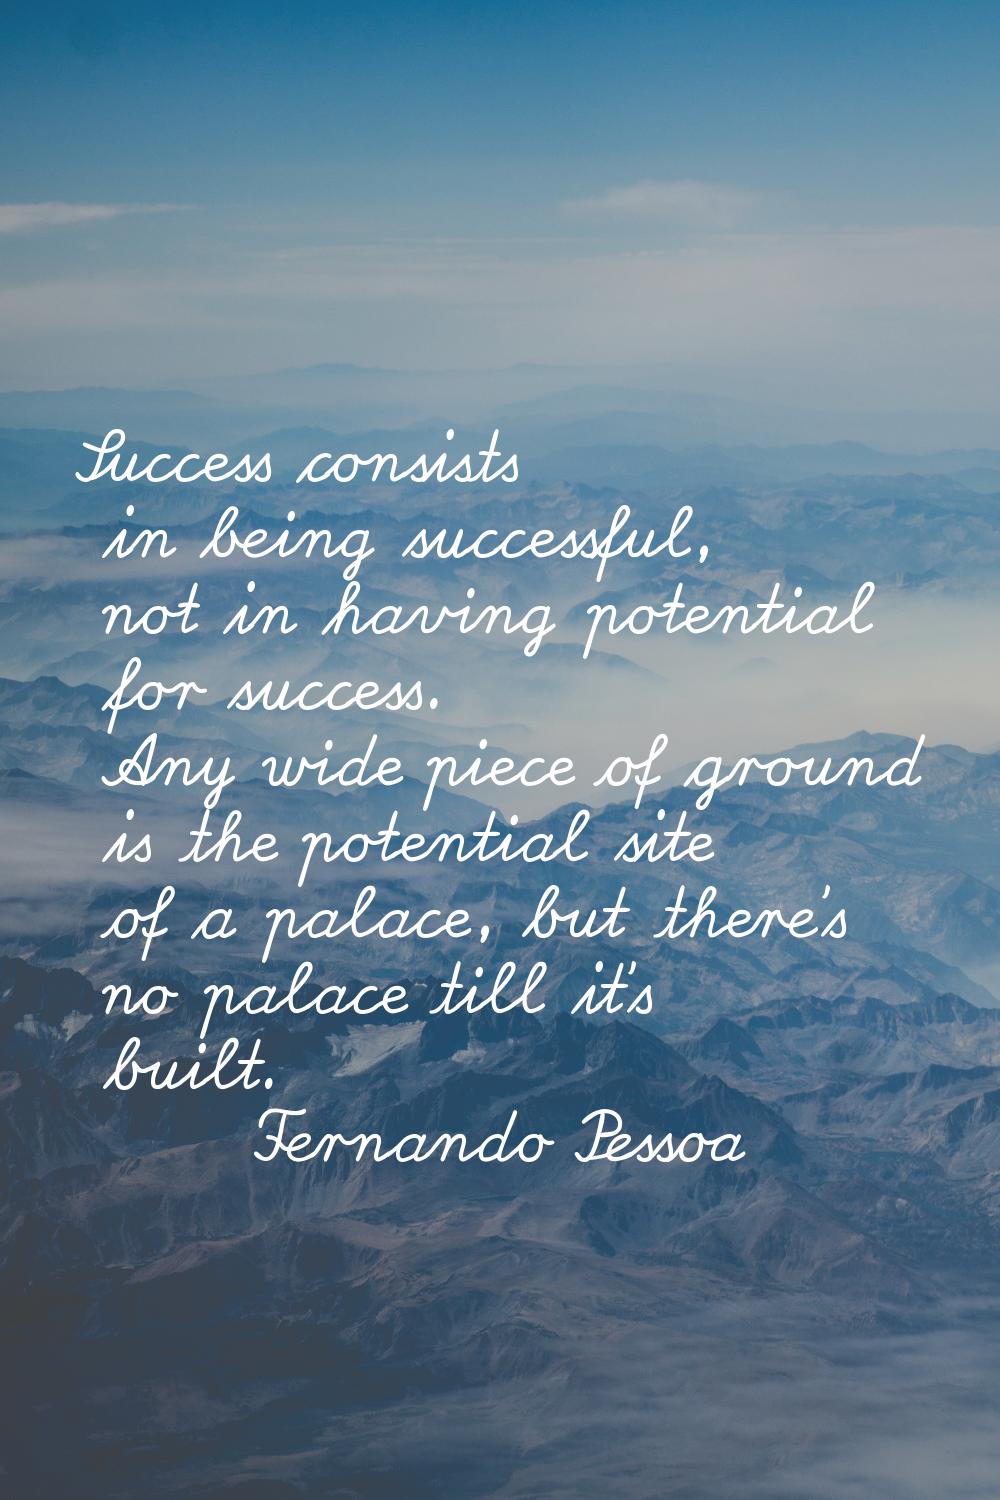 Success consists in being successful, not in having potential for success. Any wide piece of ground